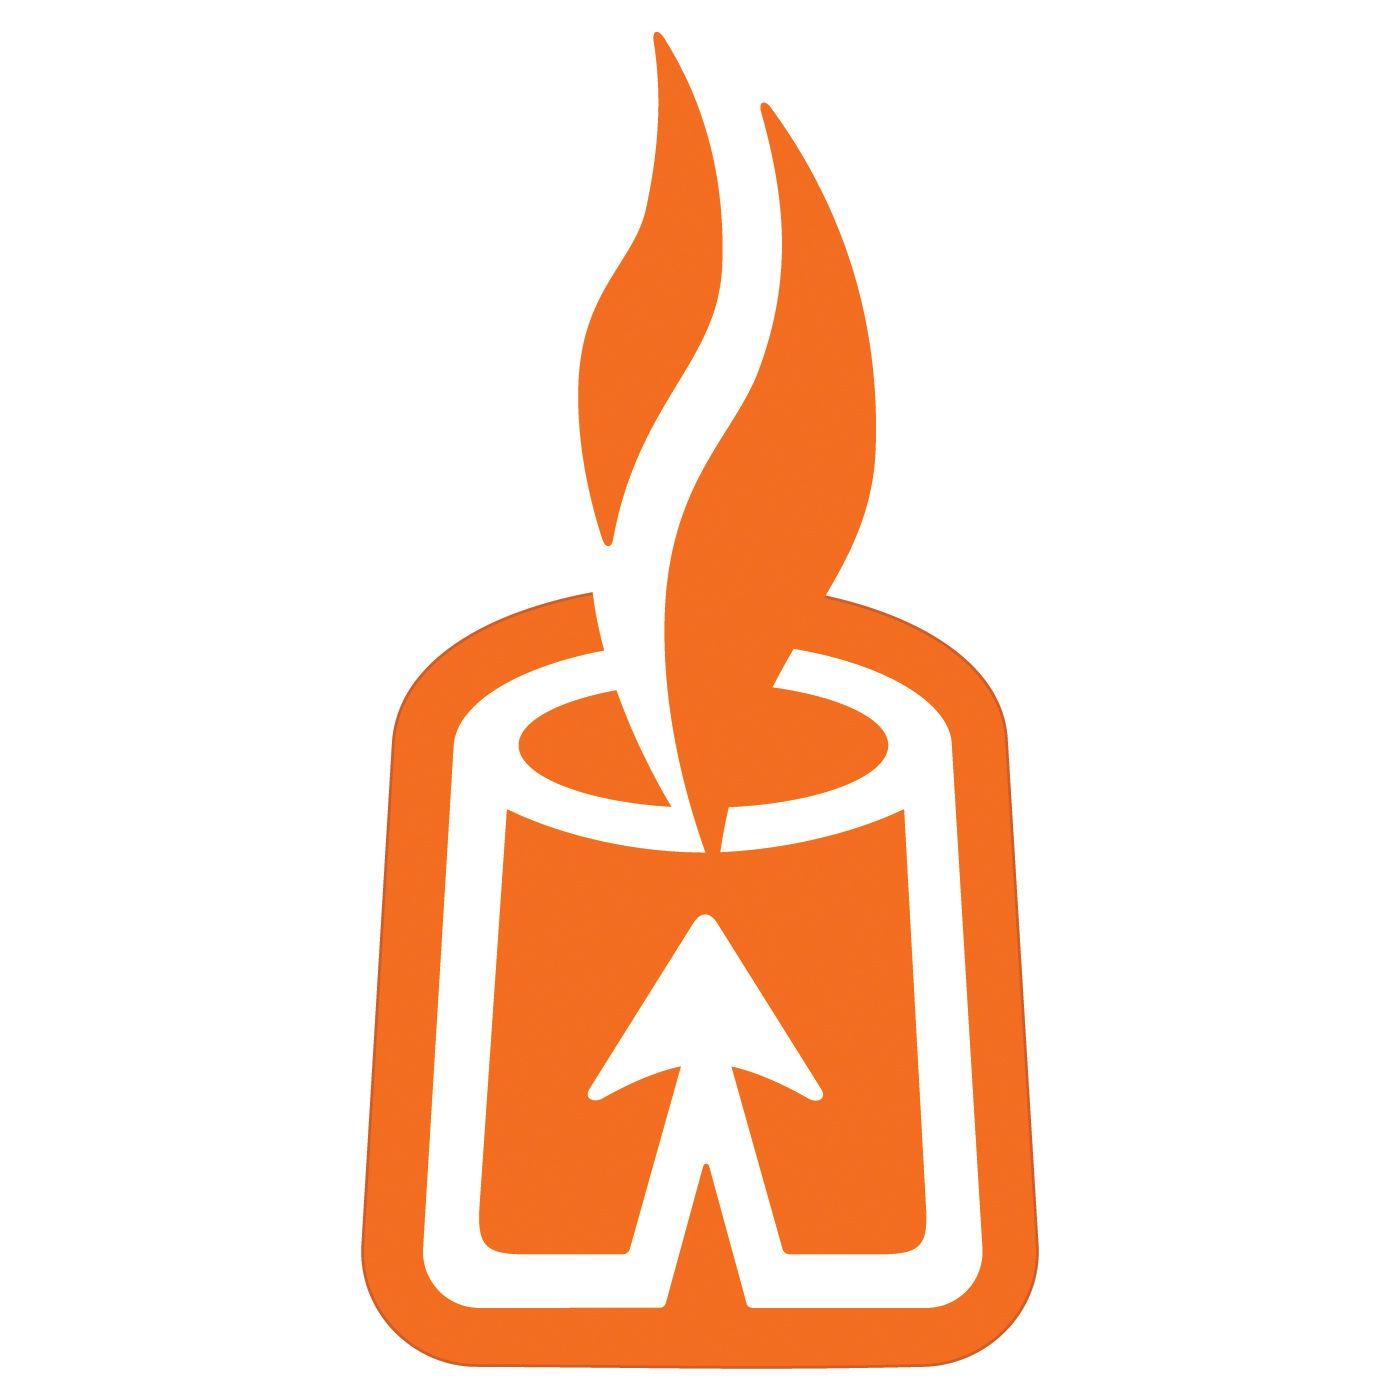 Orange and White Arrow Logo - Gardner Design - RTI logo design. A tower with an arrow pointing up ...